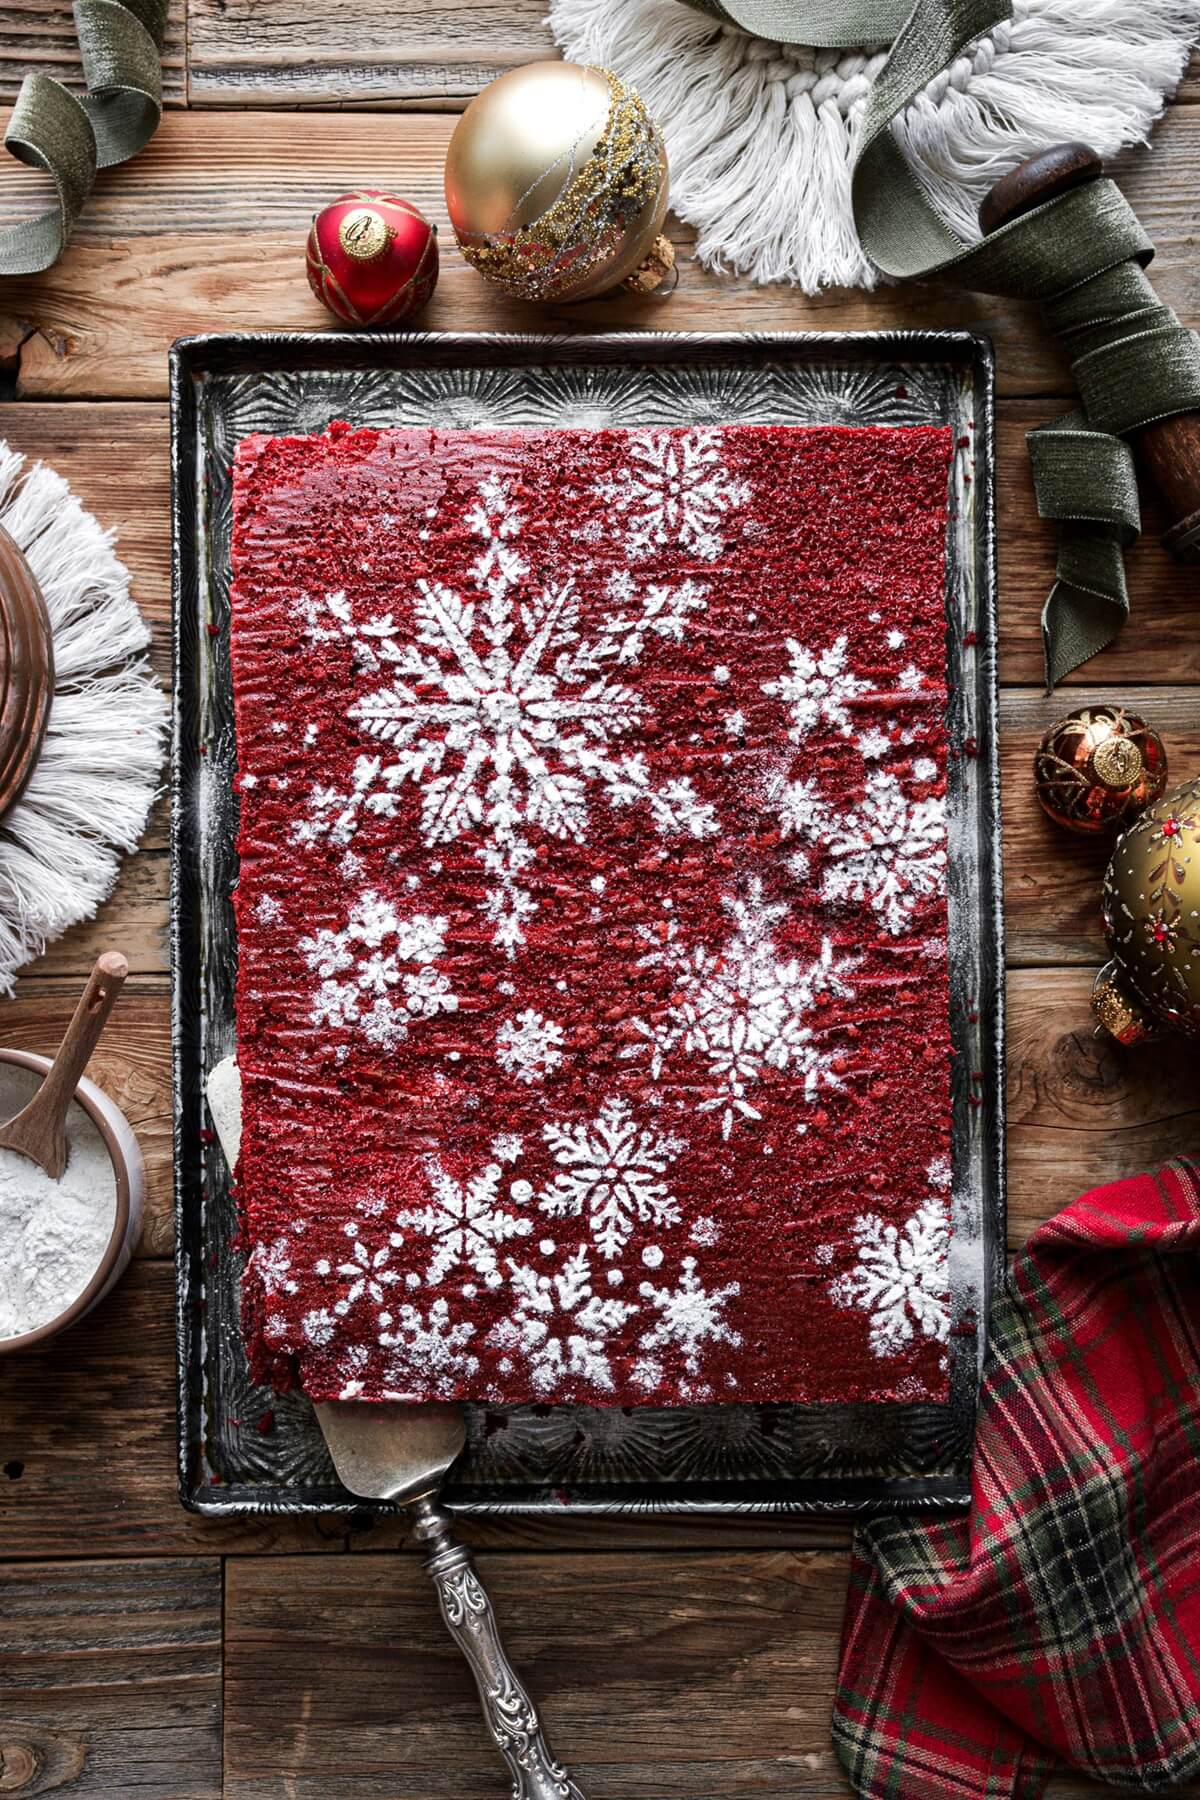 Red velvet sheet cake with powdered sugar snowflakes.